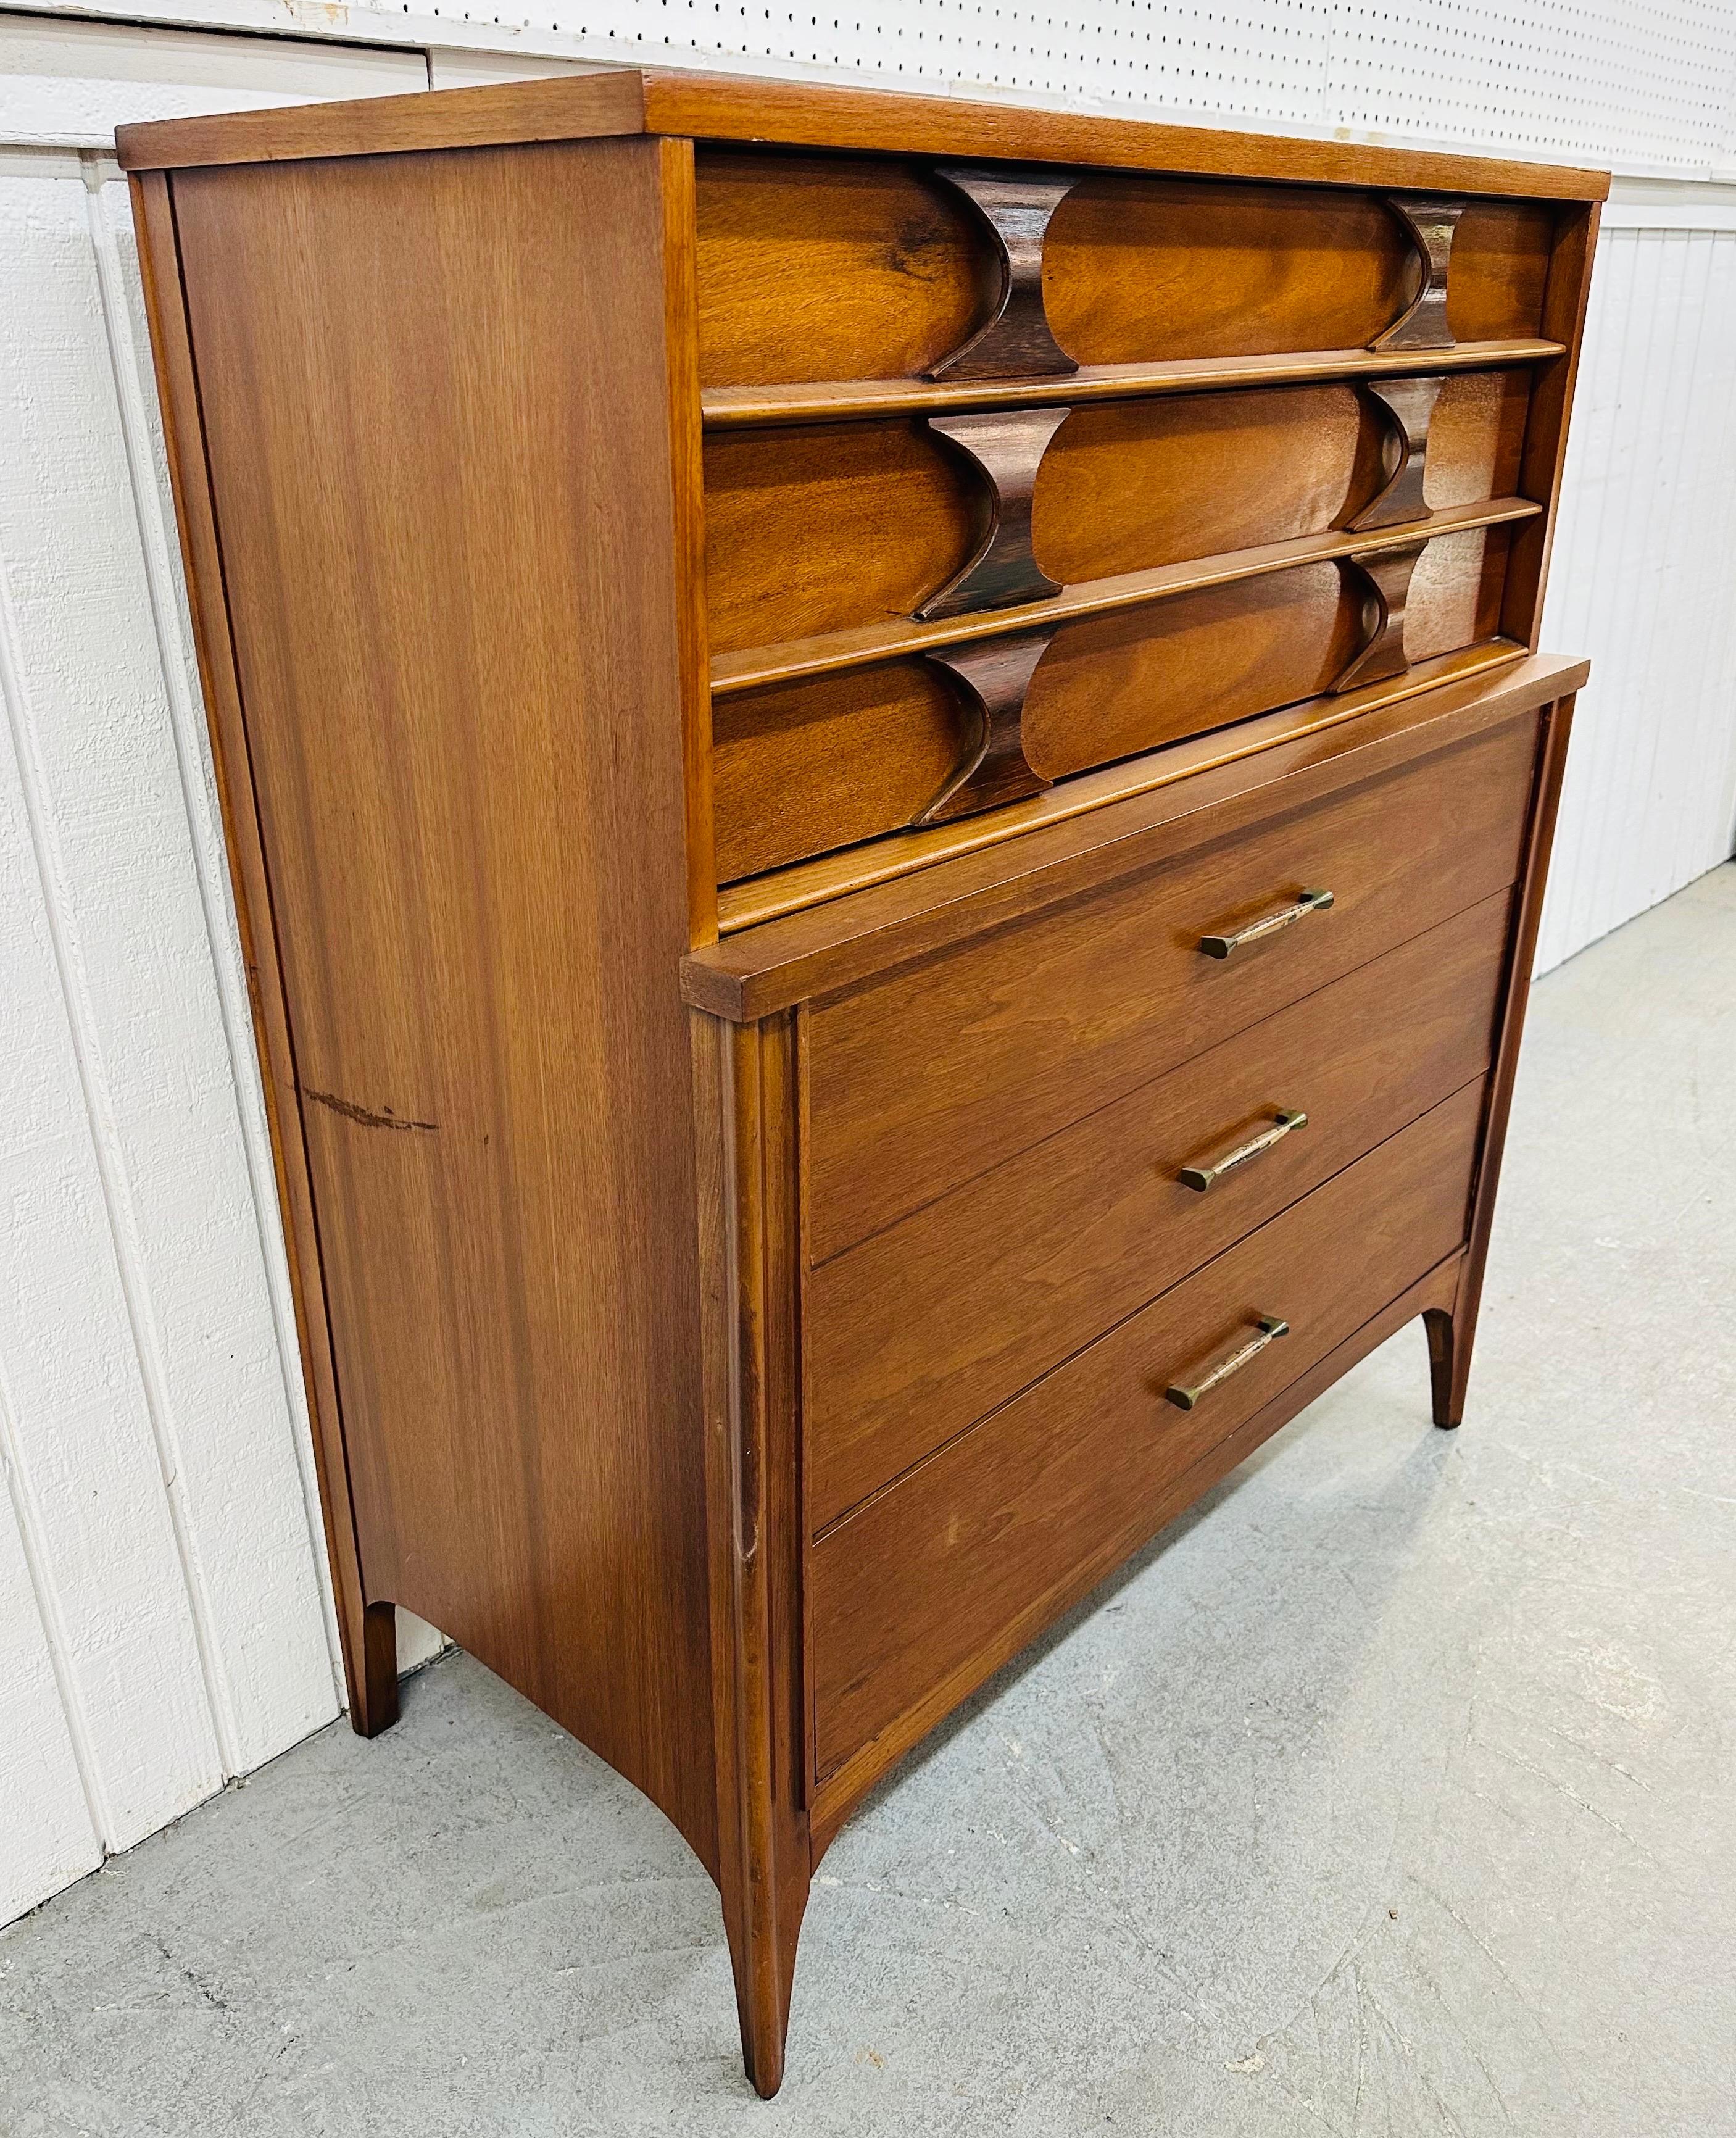 This listing is for a Mid-Century Modern Kent Coffey Perspecta Walnut High Chest. Featuring a straight line design, two drawers at the top with rosewood sculpted pulls, three drawers at the bottom with original hardware, modern legs, and a beautiful